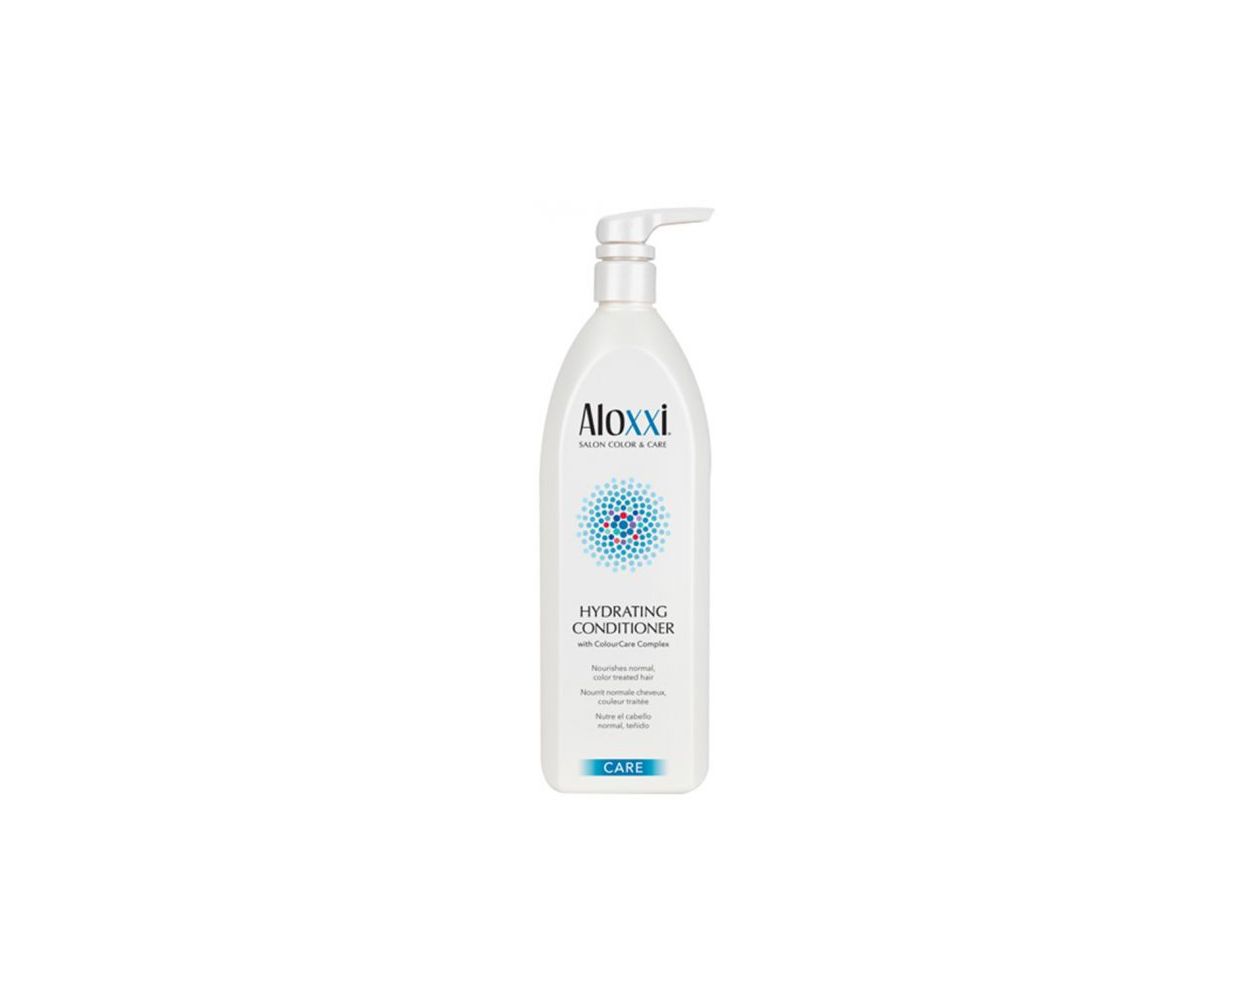 ALOXXI HYDRATING CONDITIONER 1L